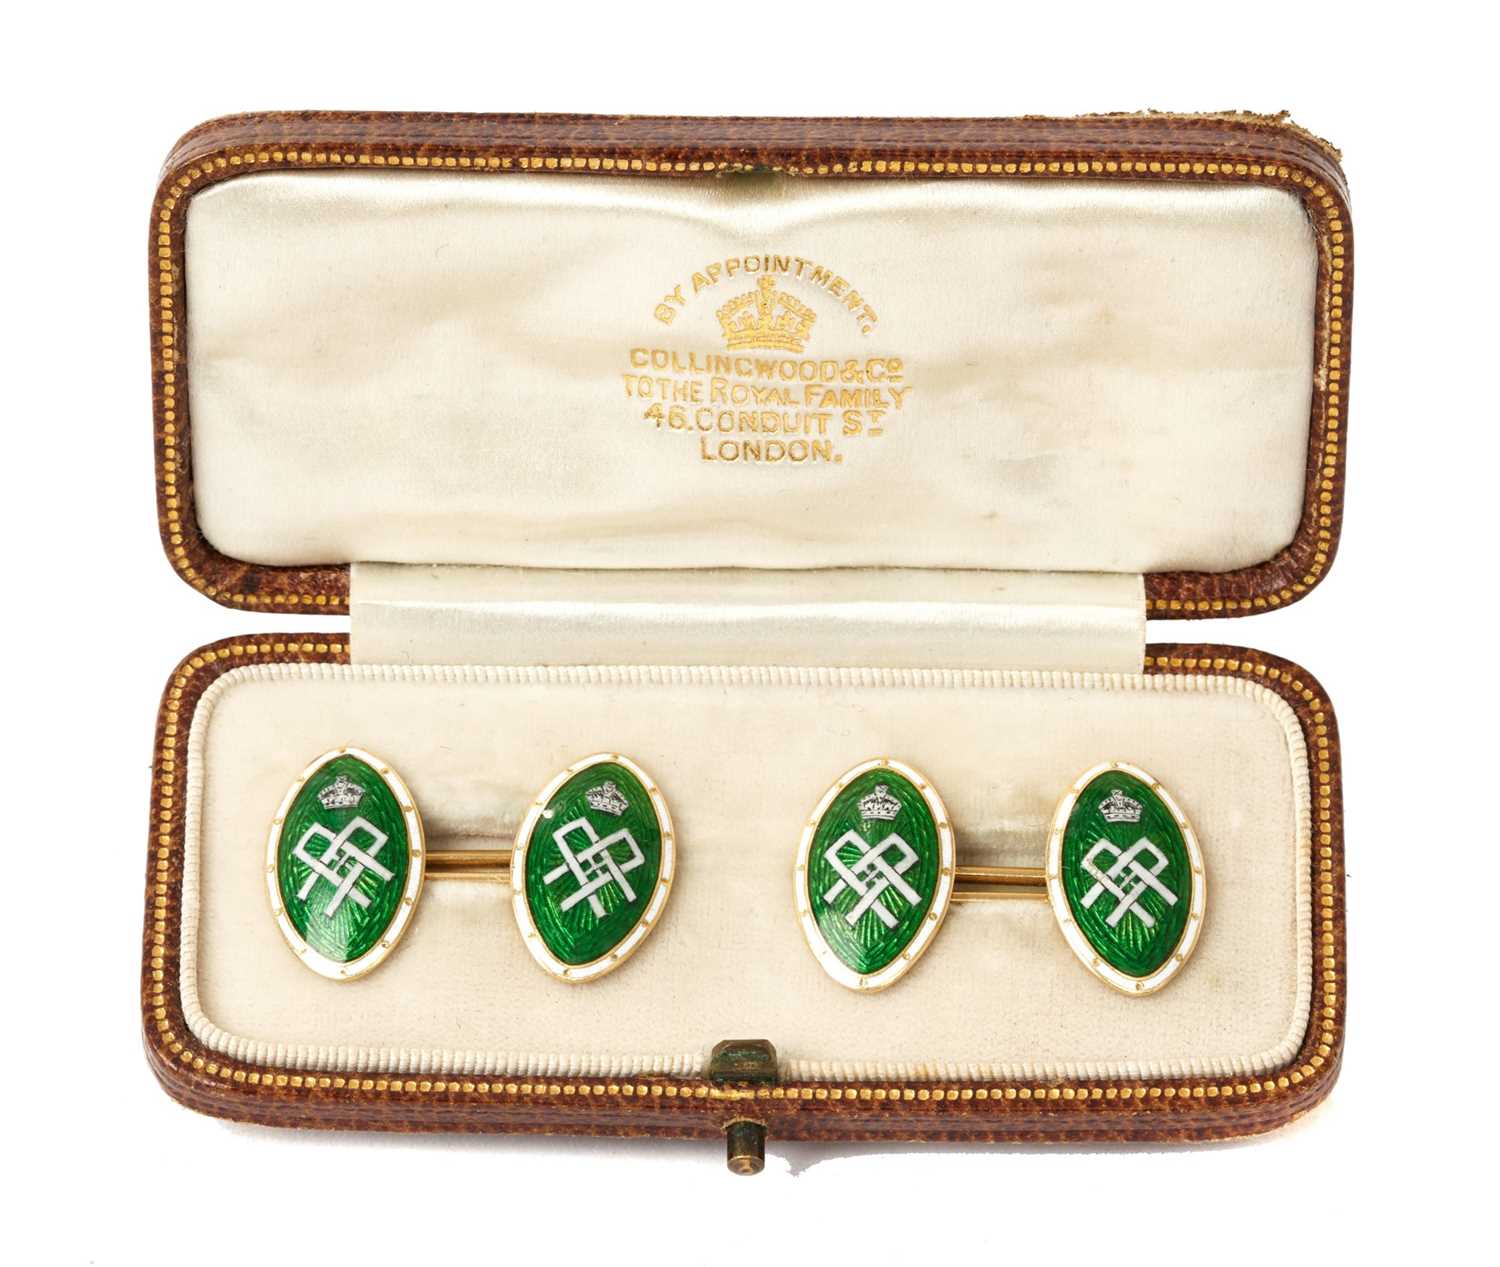 Lot 13 - H.M.Queen Alexandra, fine pair Royal presentation gold 18ct, green and white enamel cufflinks in fitted case with gilt crowned cipher to lid